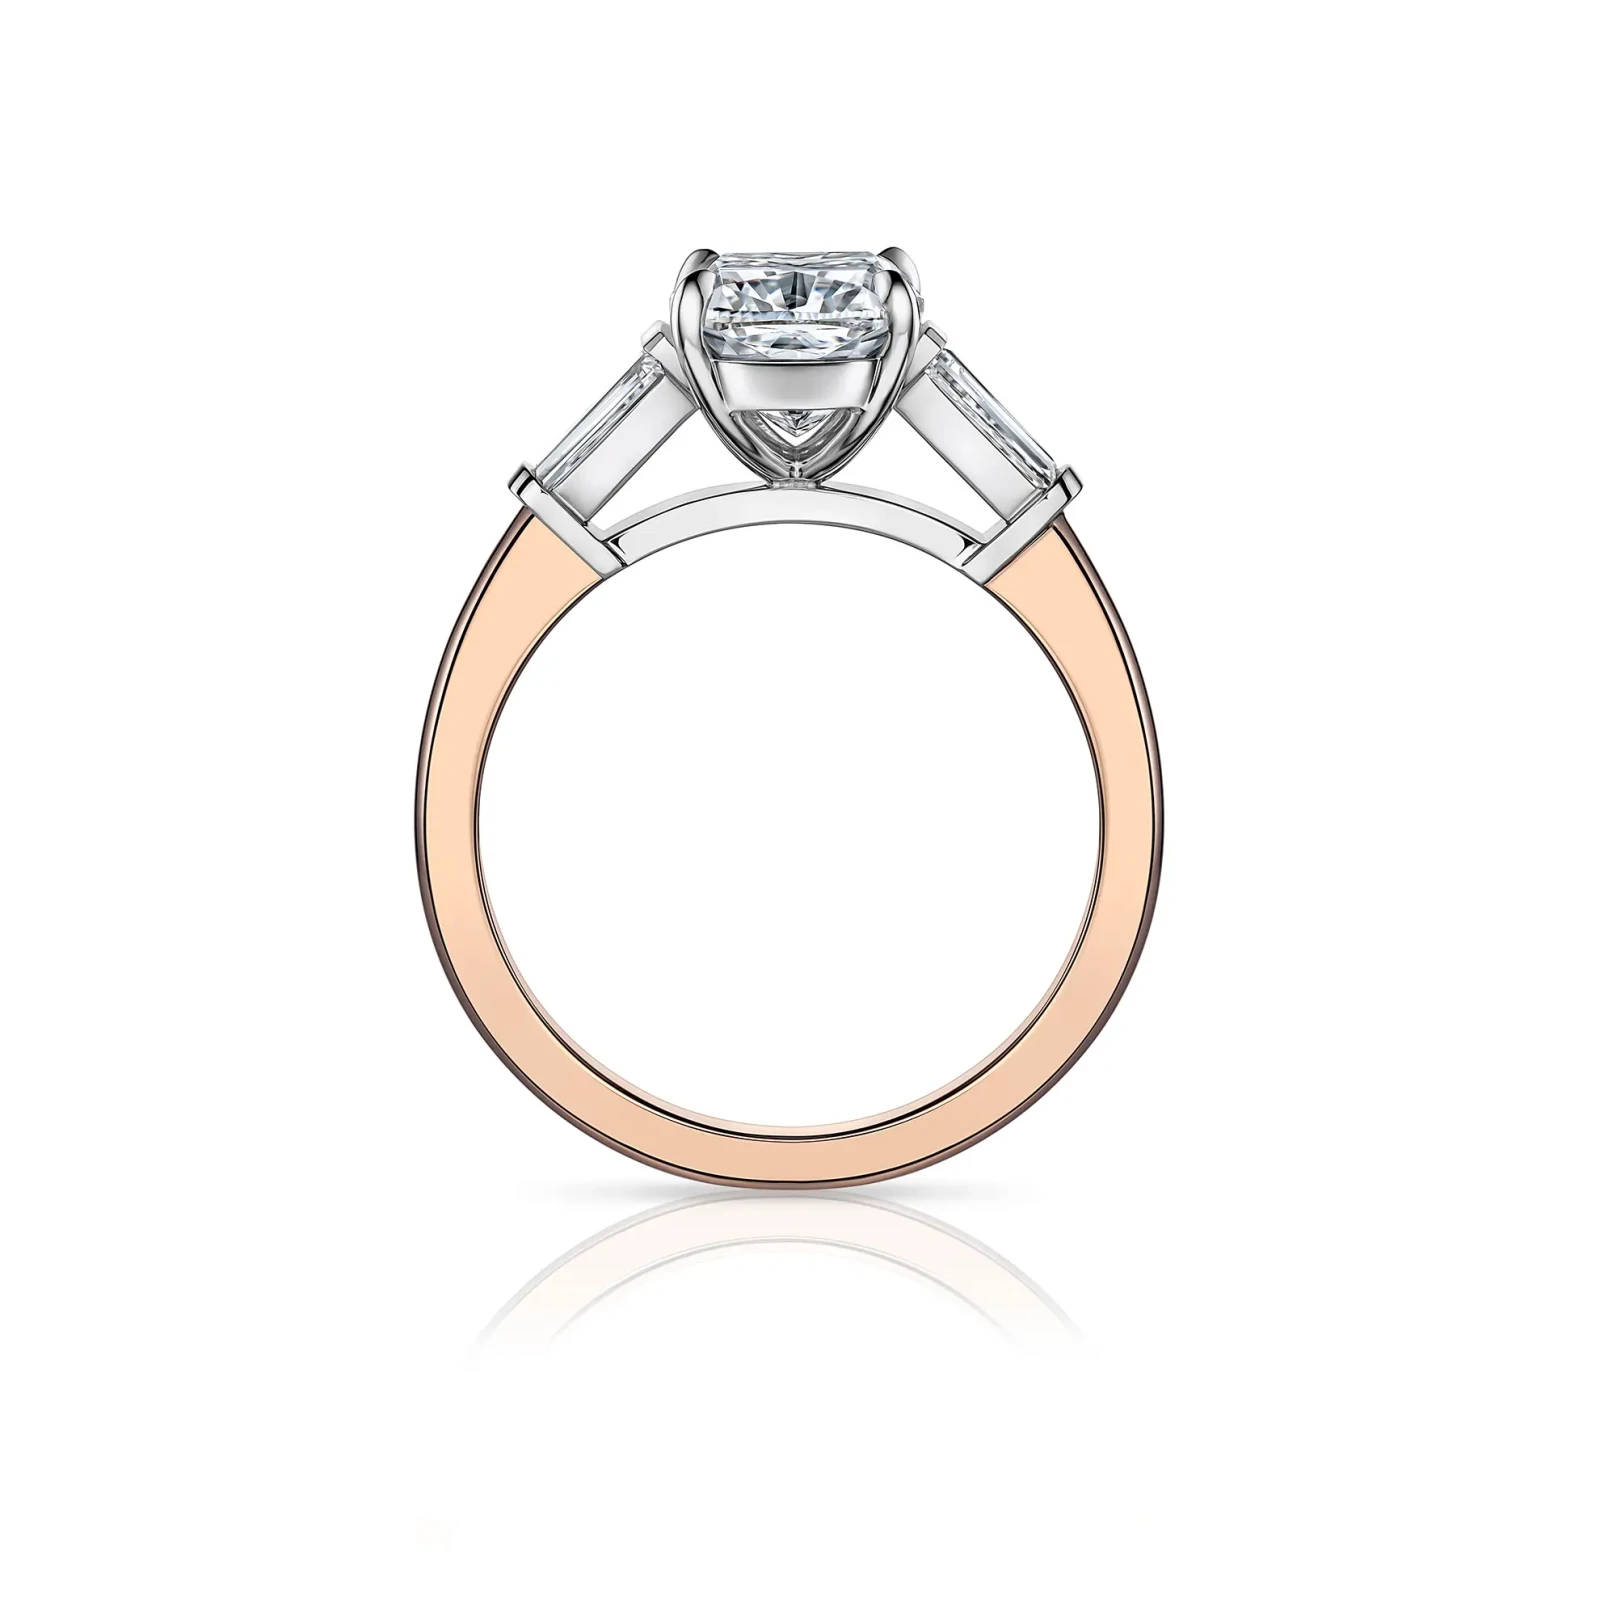 Cushion Cut Diamond Engagement Ring with Tapered Diamond Side Stones